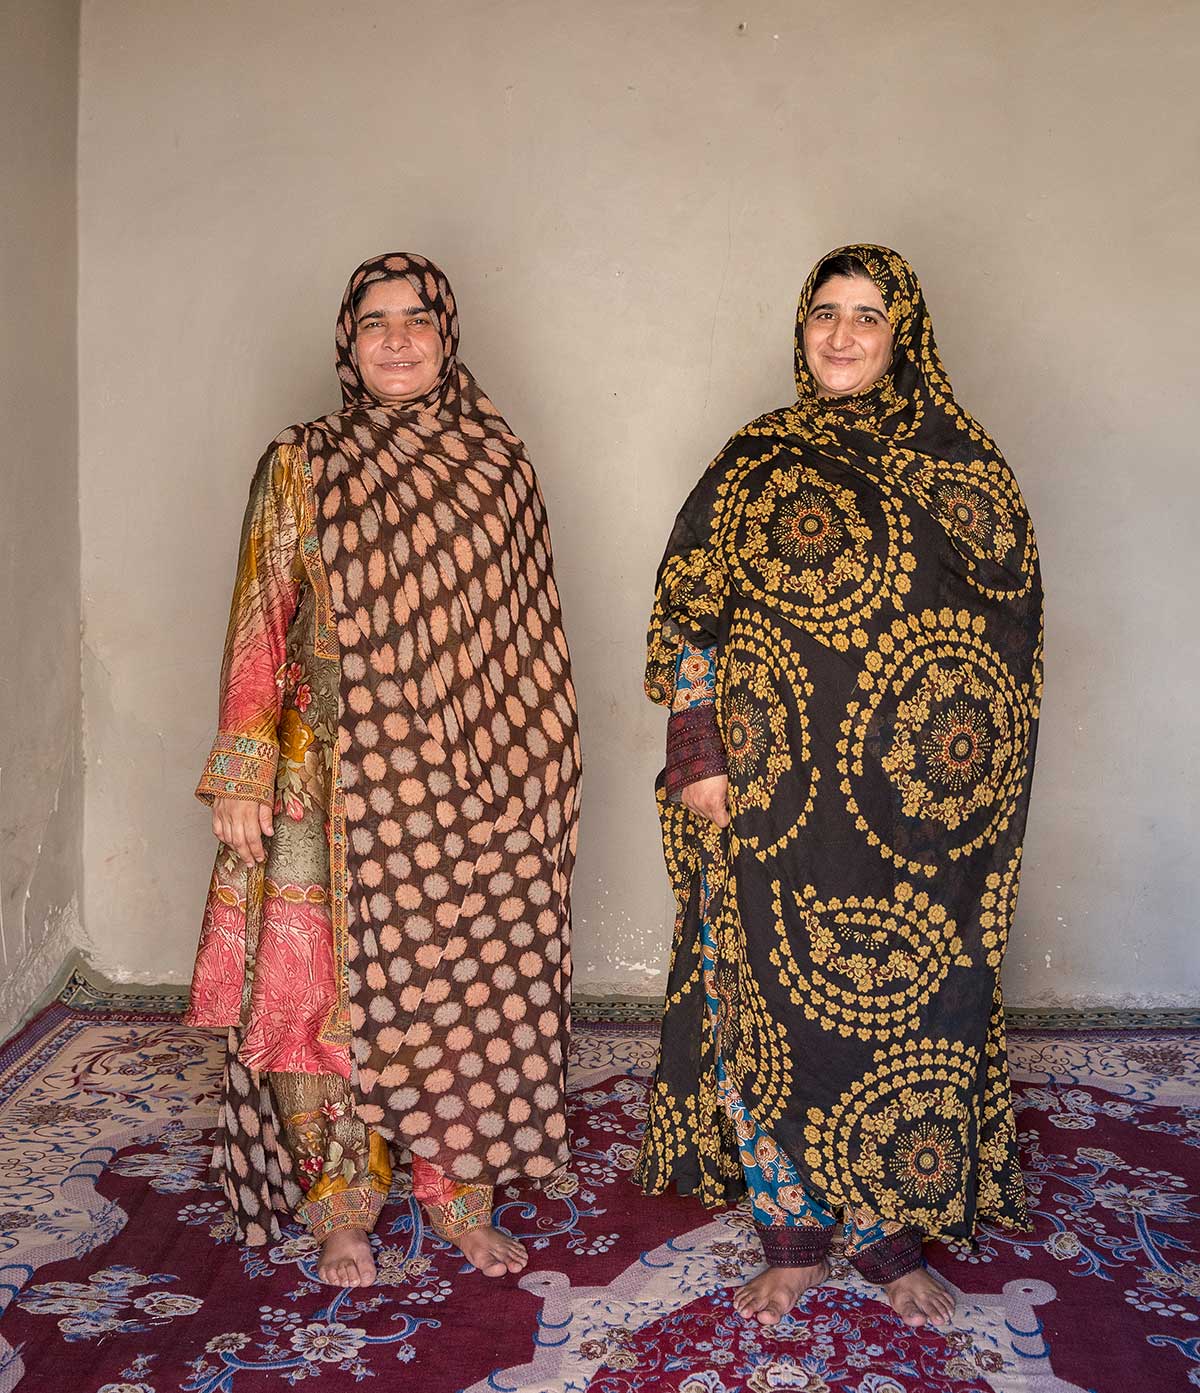 Two women embroiders from Baluchistan